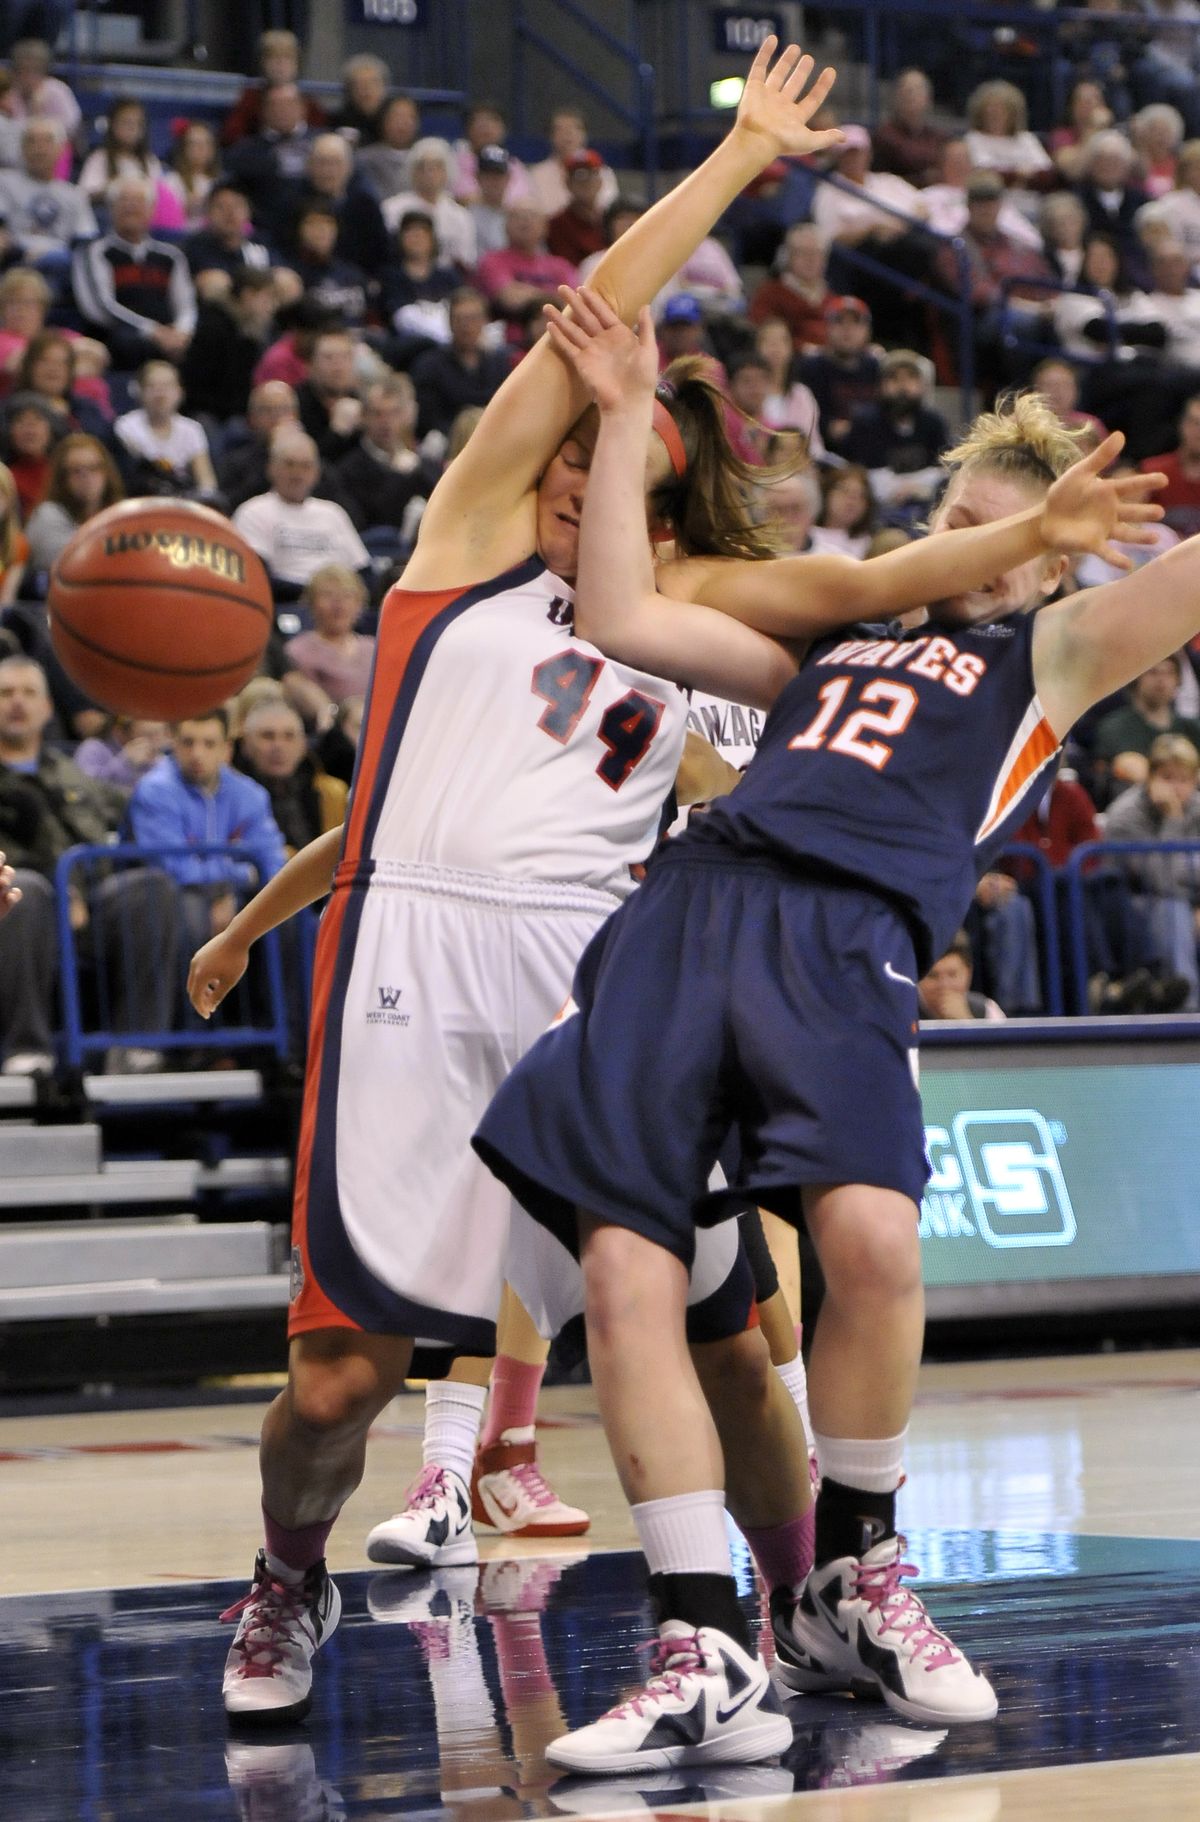 Gonzaga’s Kelly Bowen, left, commits a foul and sends Pepperdine’s Kelsey Patrick to the floor while boxing out for a rebound on Saturday. (Jesse Tinsley)